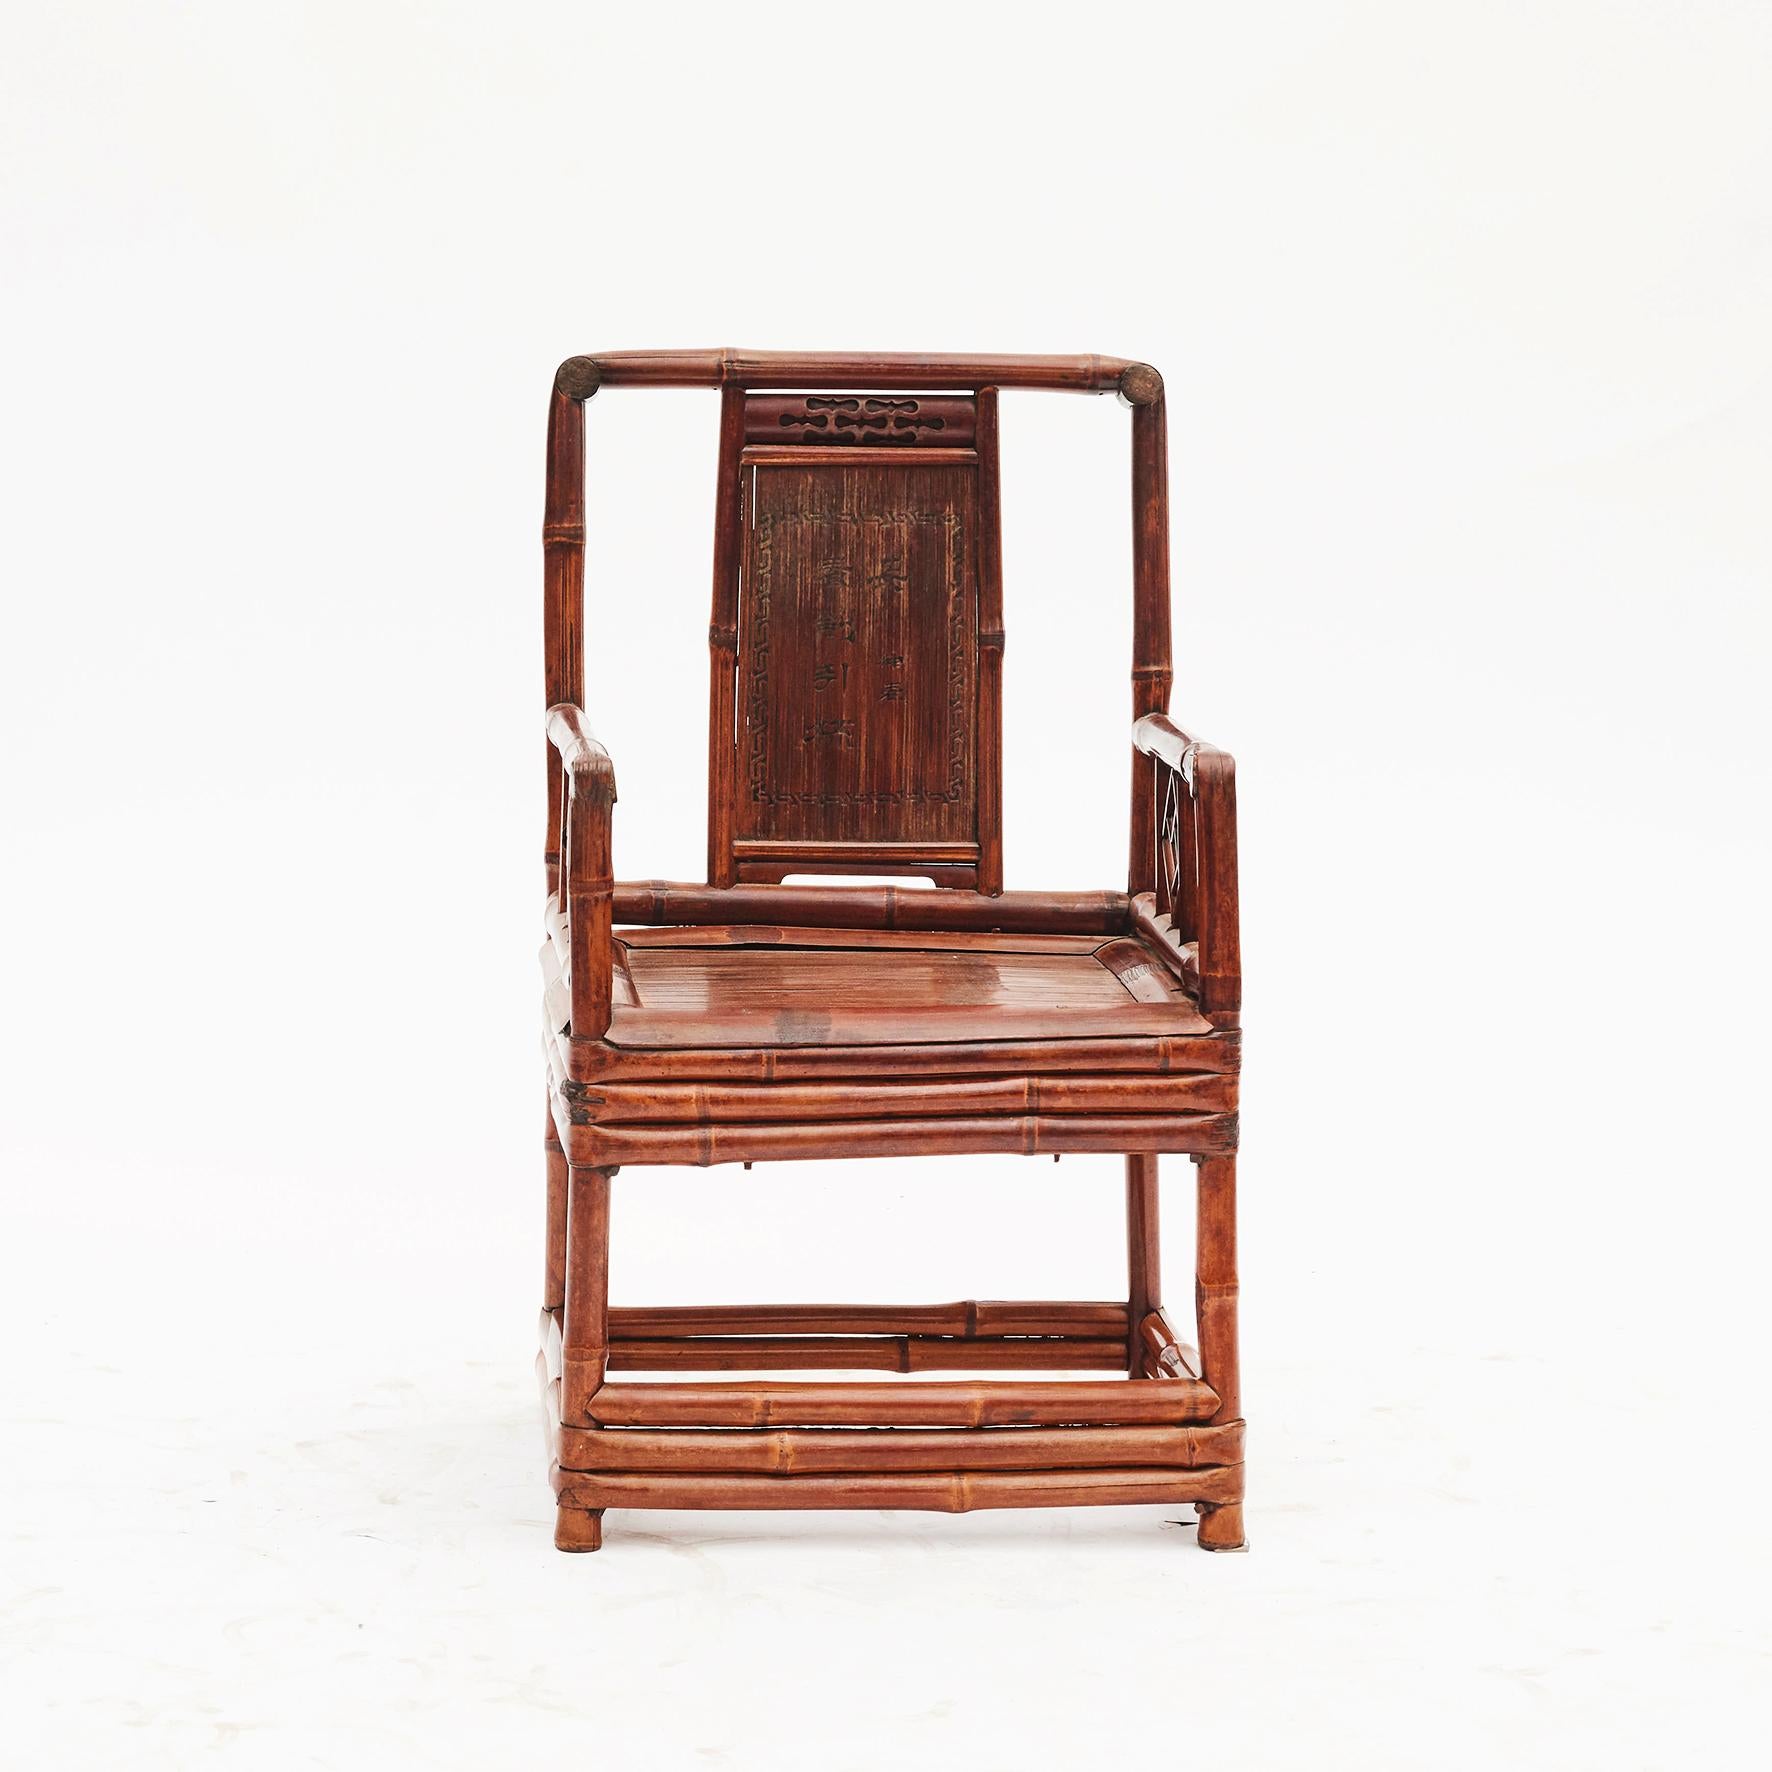 Pair of Chinese bamboo chairs each with inset rectangular panel with calligraphy lettering, China, 1860-1880.
Original condition with a rich, warm patina.
Sold as a pair.